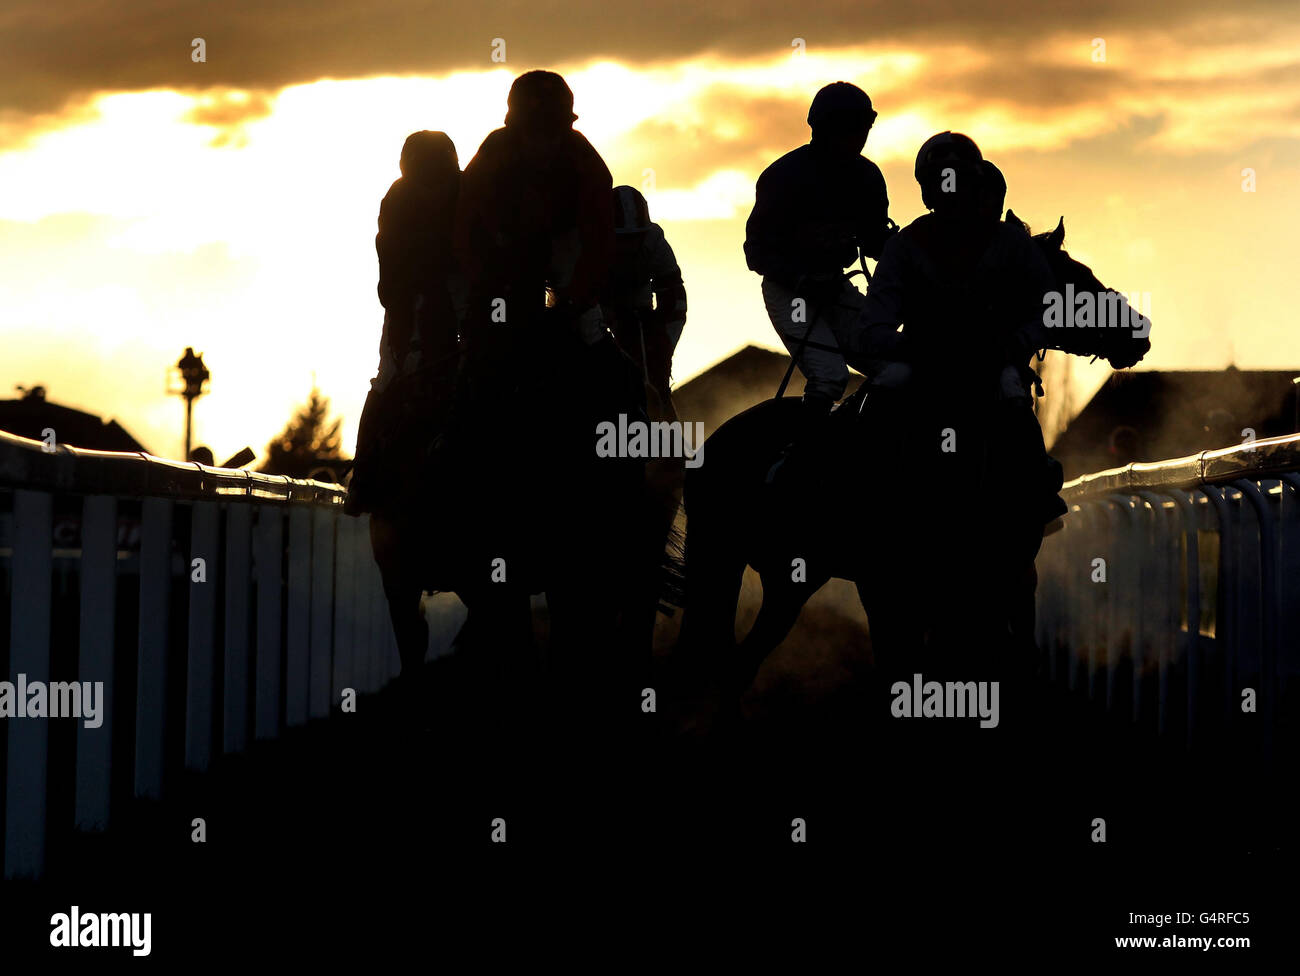 Horse Racing - The International - Day One - Cheltenham Racecourse. A silhouette of runners making their way in after the Citipost Handicap Hurdle during day one of The International at Cheltenham Racecourse. Stock Photo